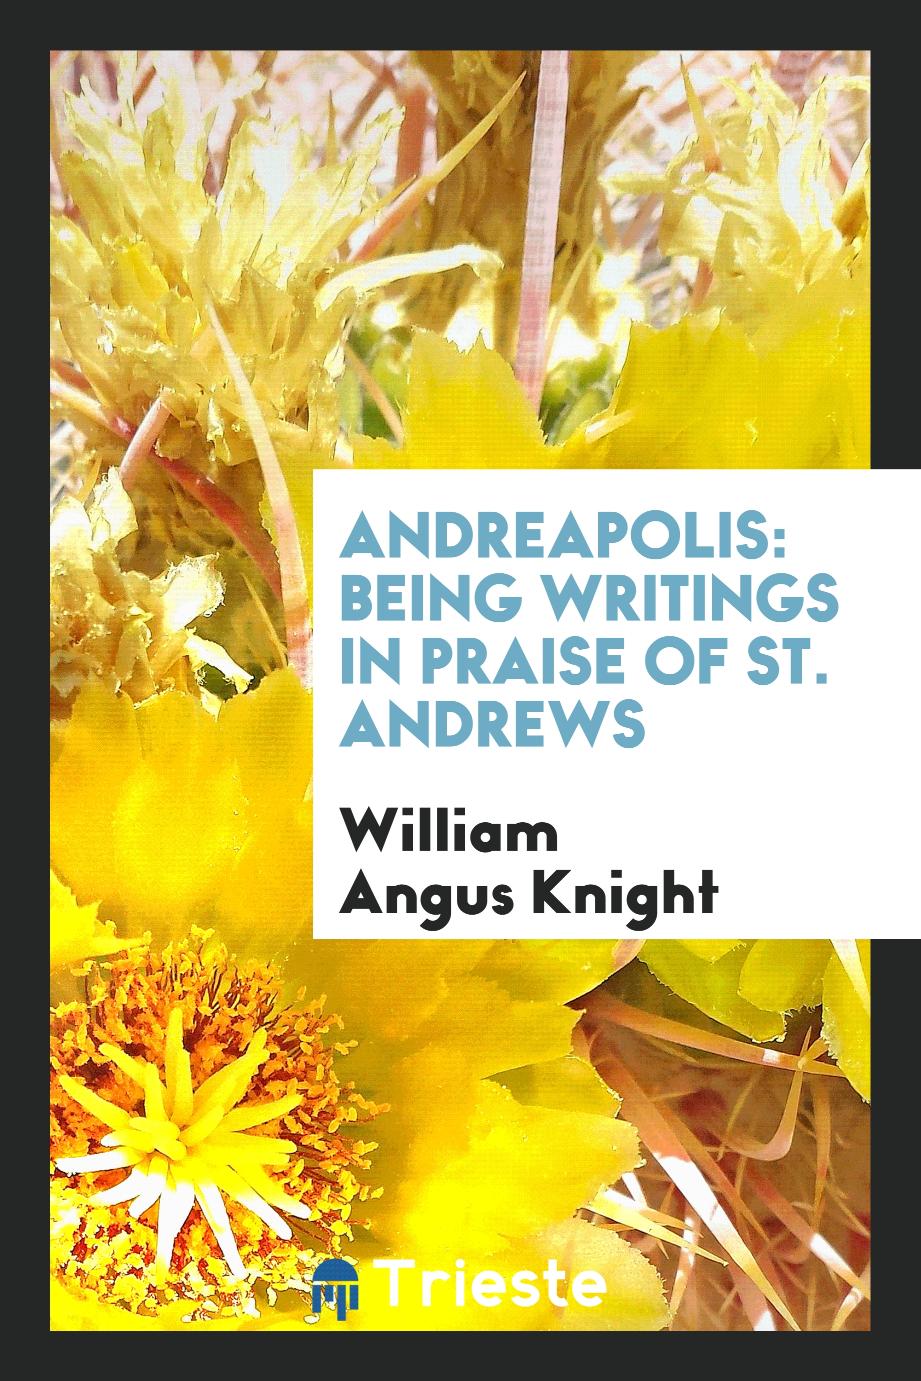 William Angus Knight - Andreapolis: Being Writings in Praise of St. Andrews